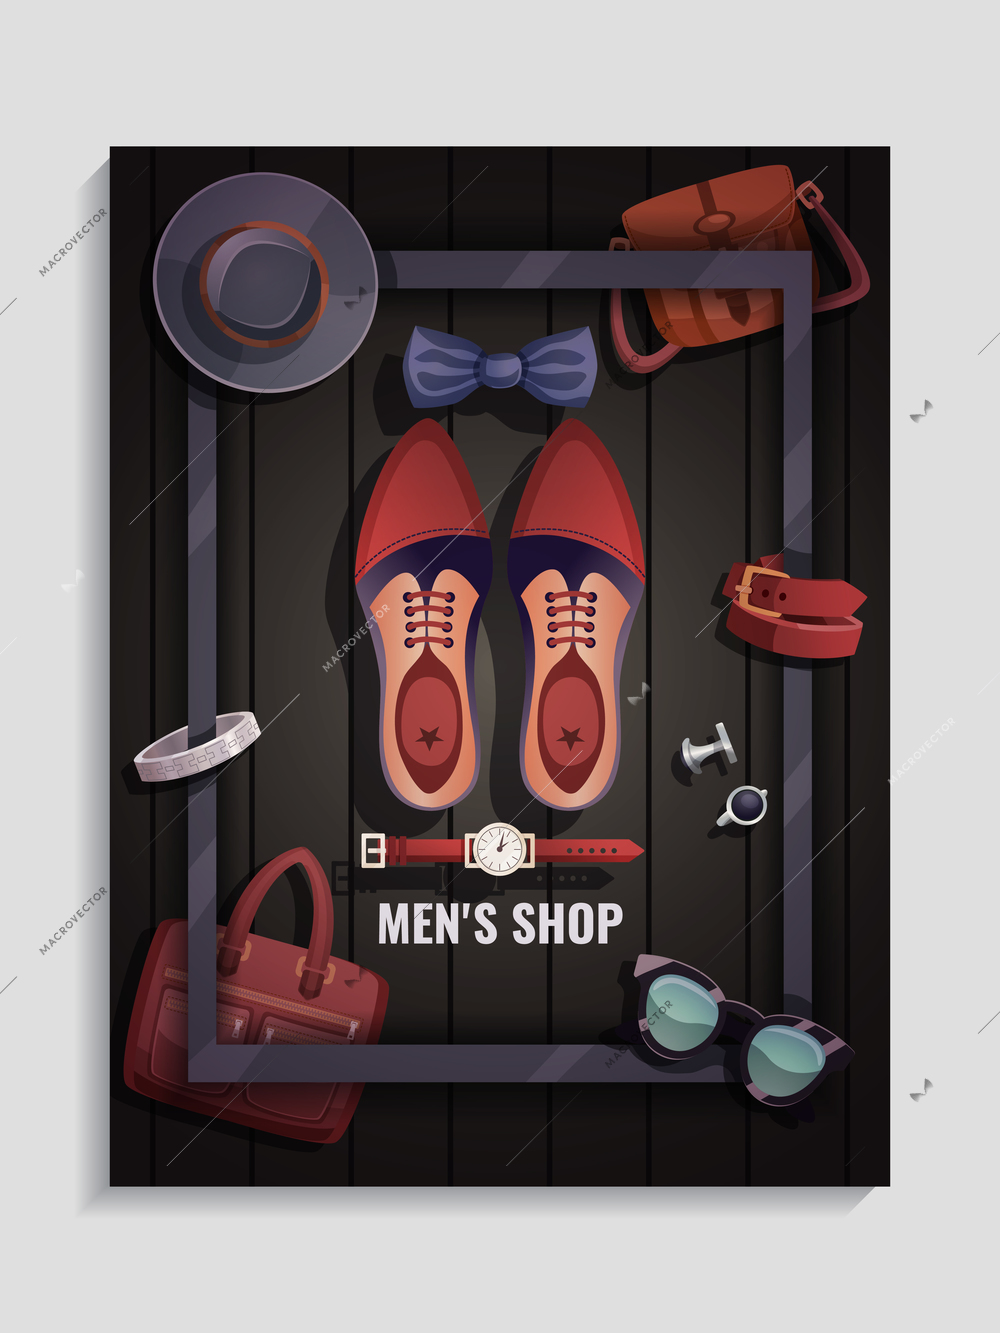 Colored men accessories poster men s shop headline and shoes watch tie glass bag vector illustration